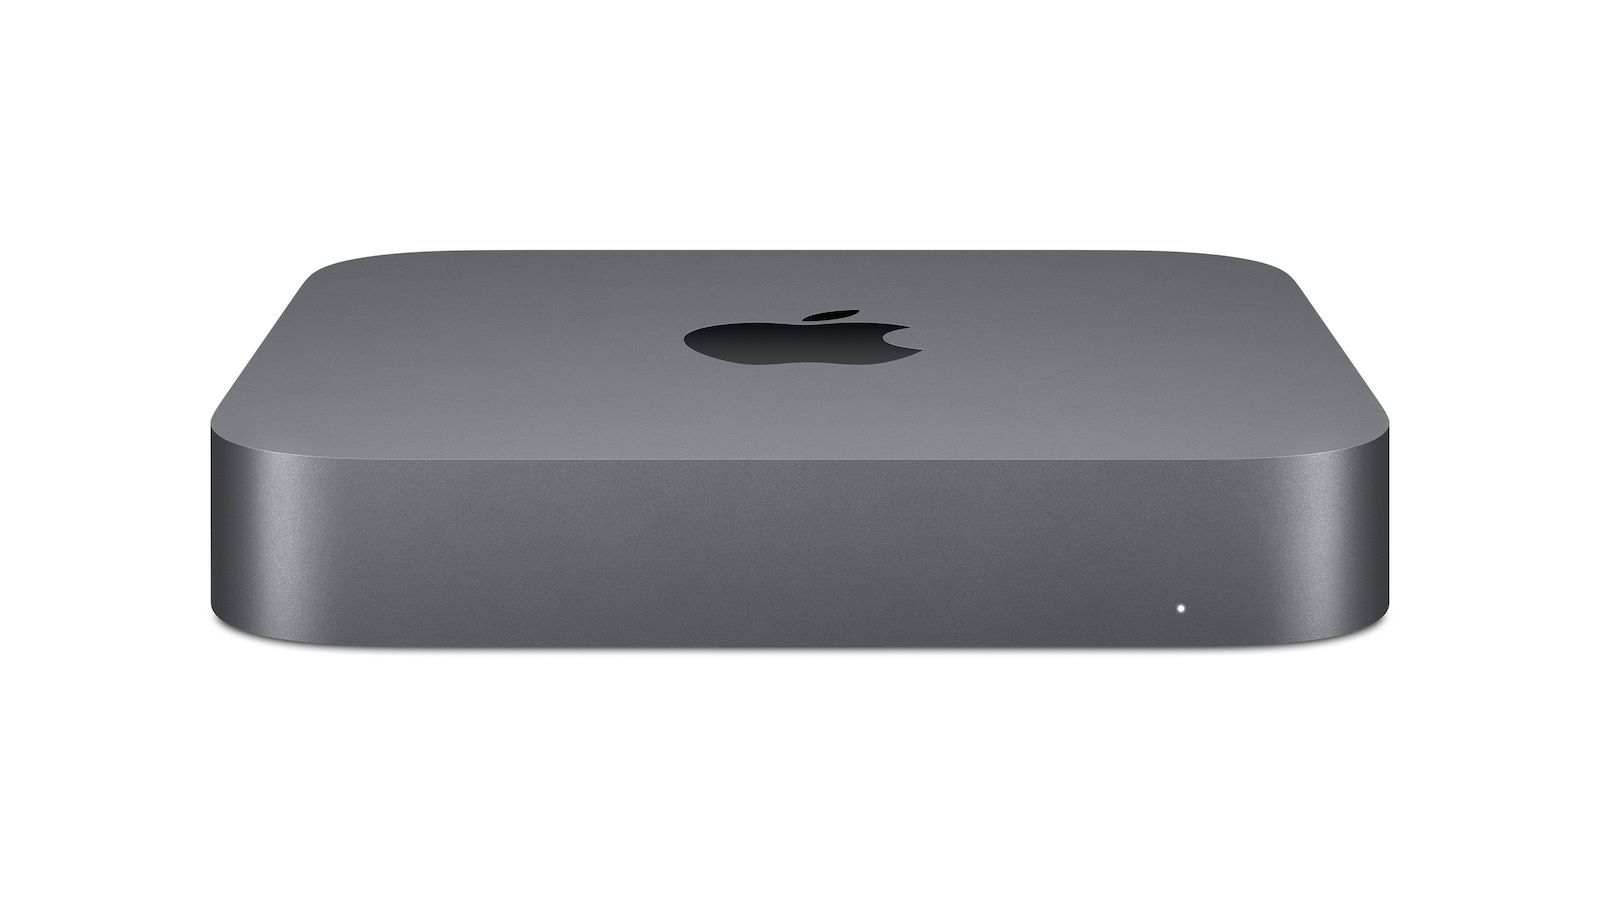 Mac Mini and Mac Professional are Apple’s Final Two Remaining Intel Macs With Launch of Mac Studio